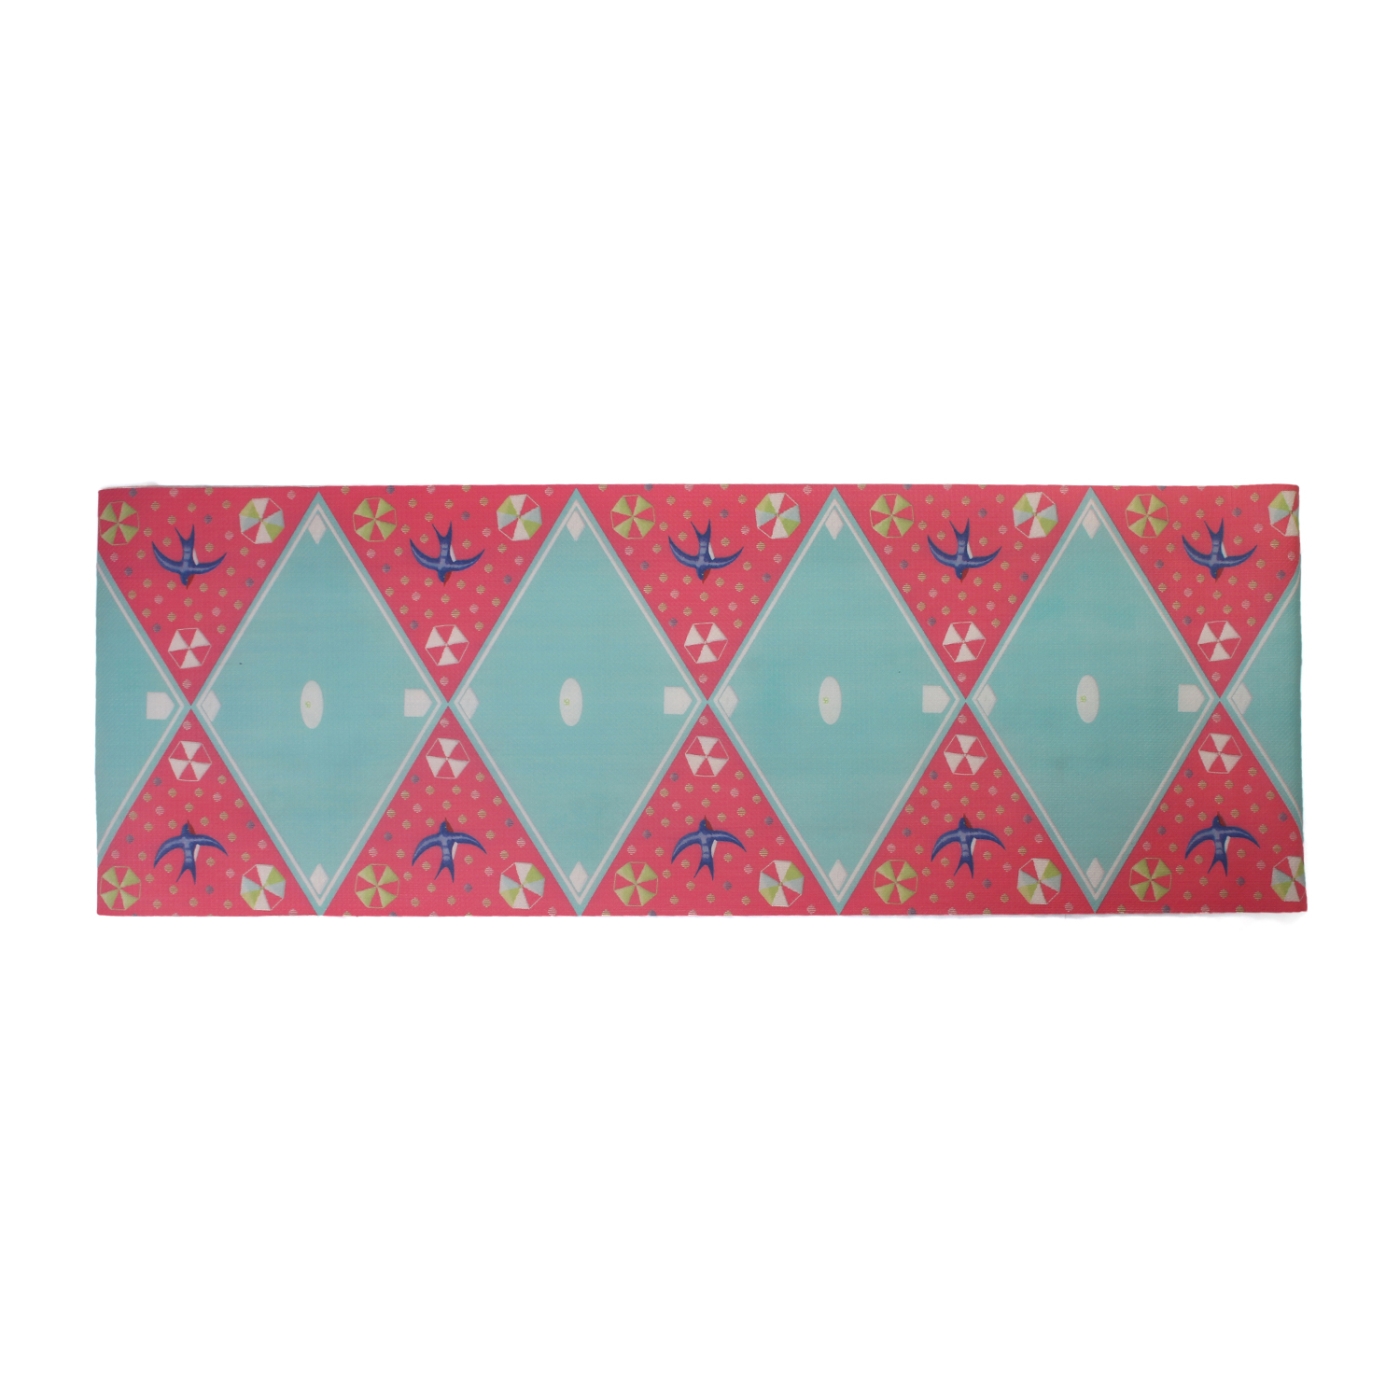 ORKA HOME Printed Yoga Mats 4 Mm - Pink And Blue